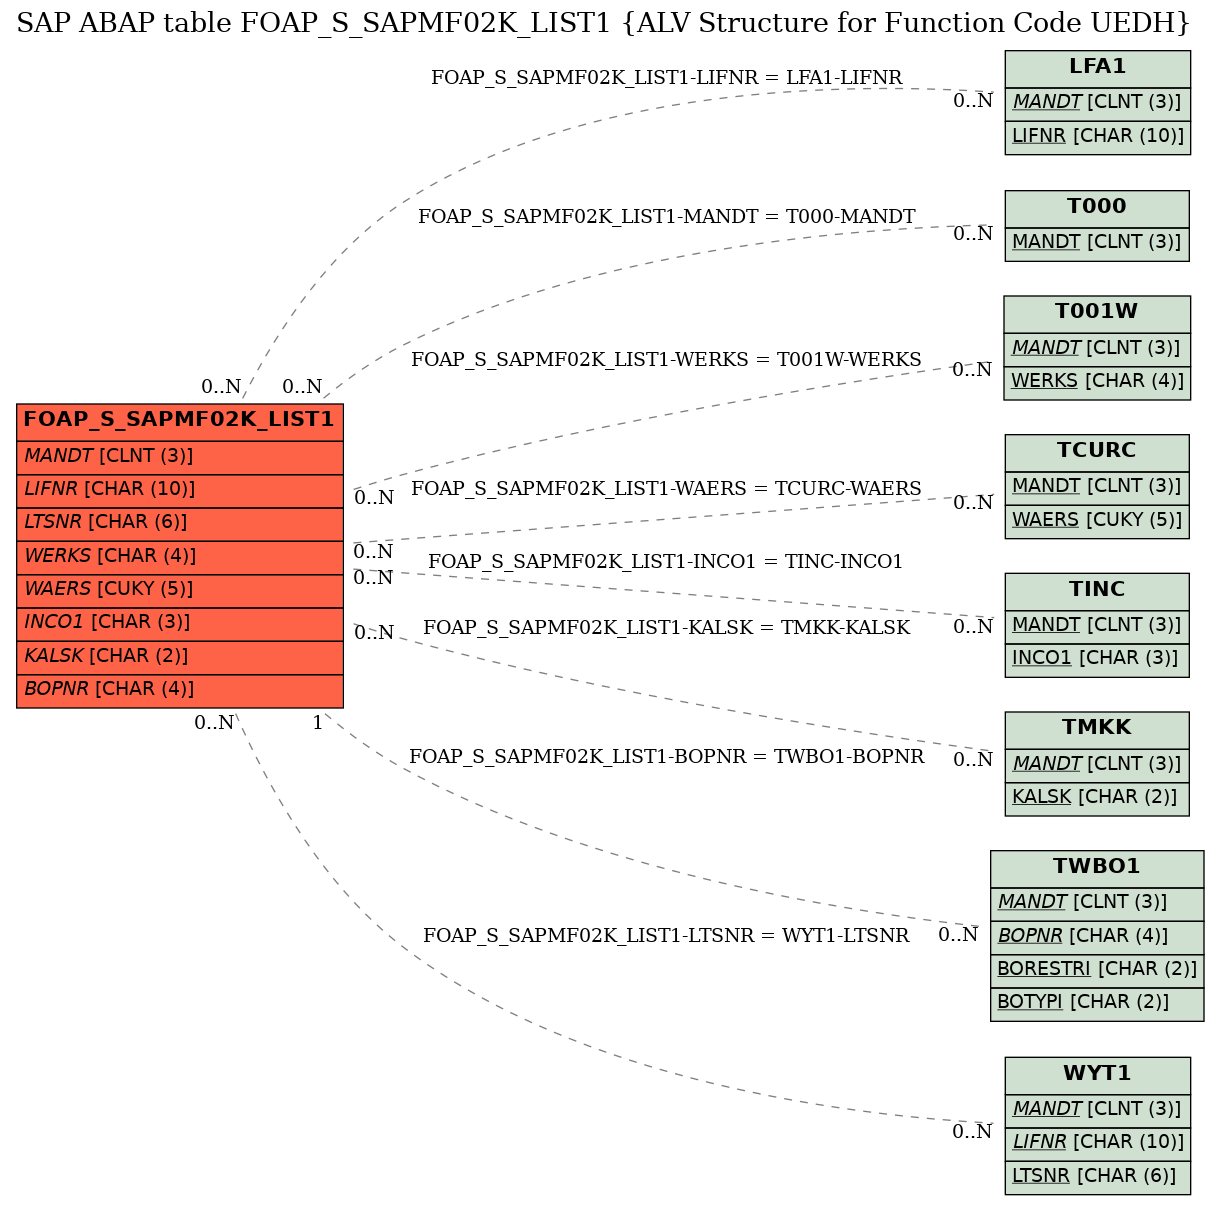 E-R Diagram for table FOAP_S_SAPMF02K_LIST1 (ALV Structure for Function Code UEDH)